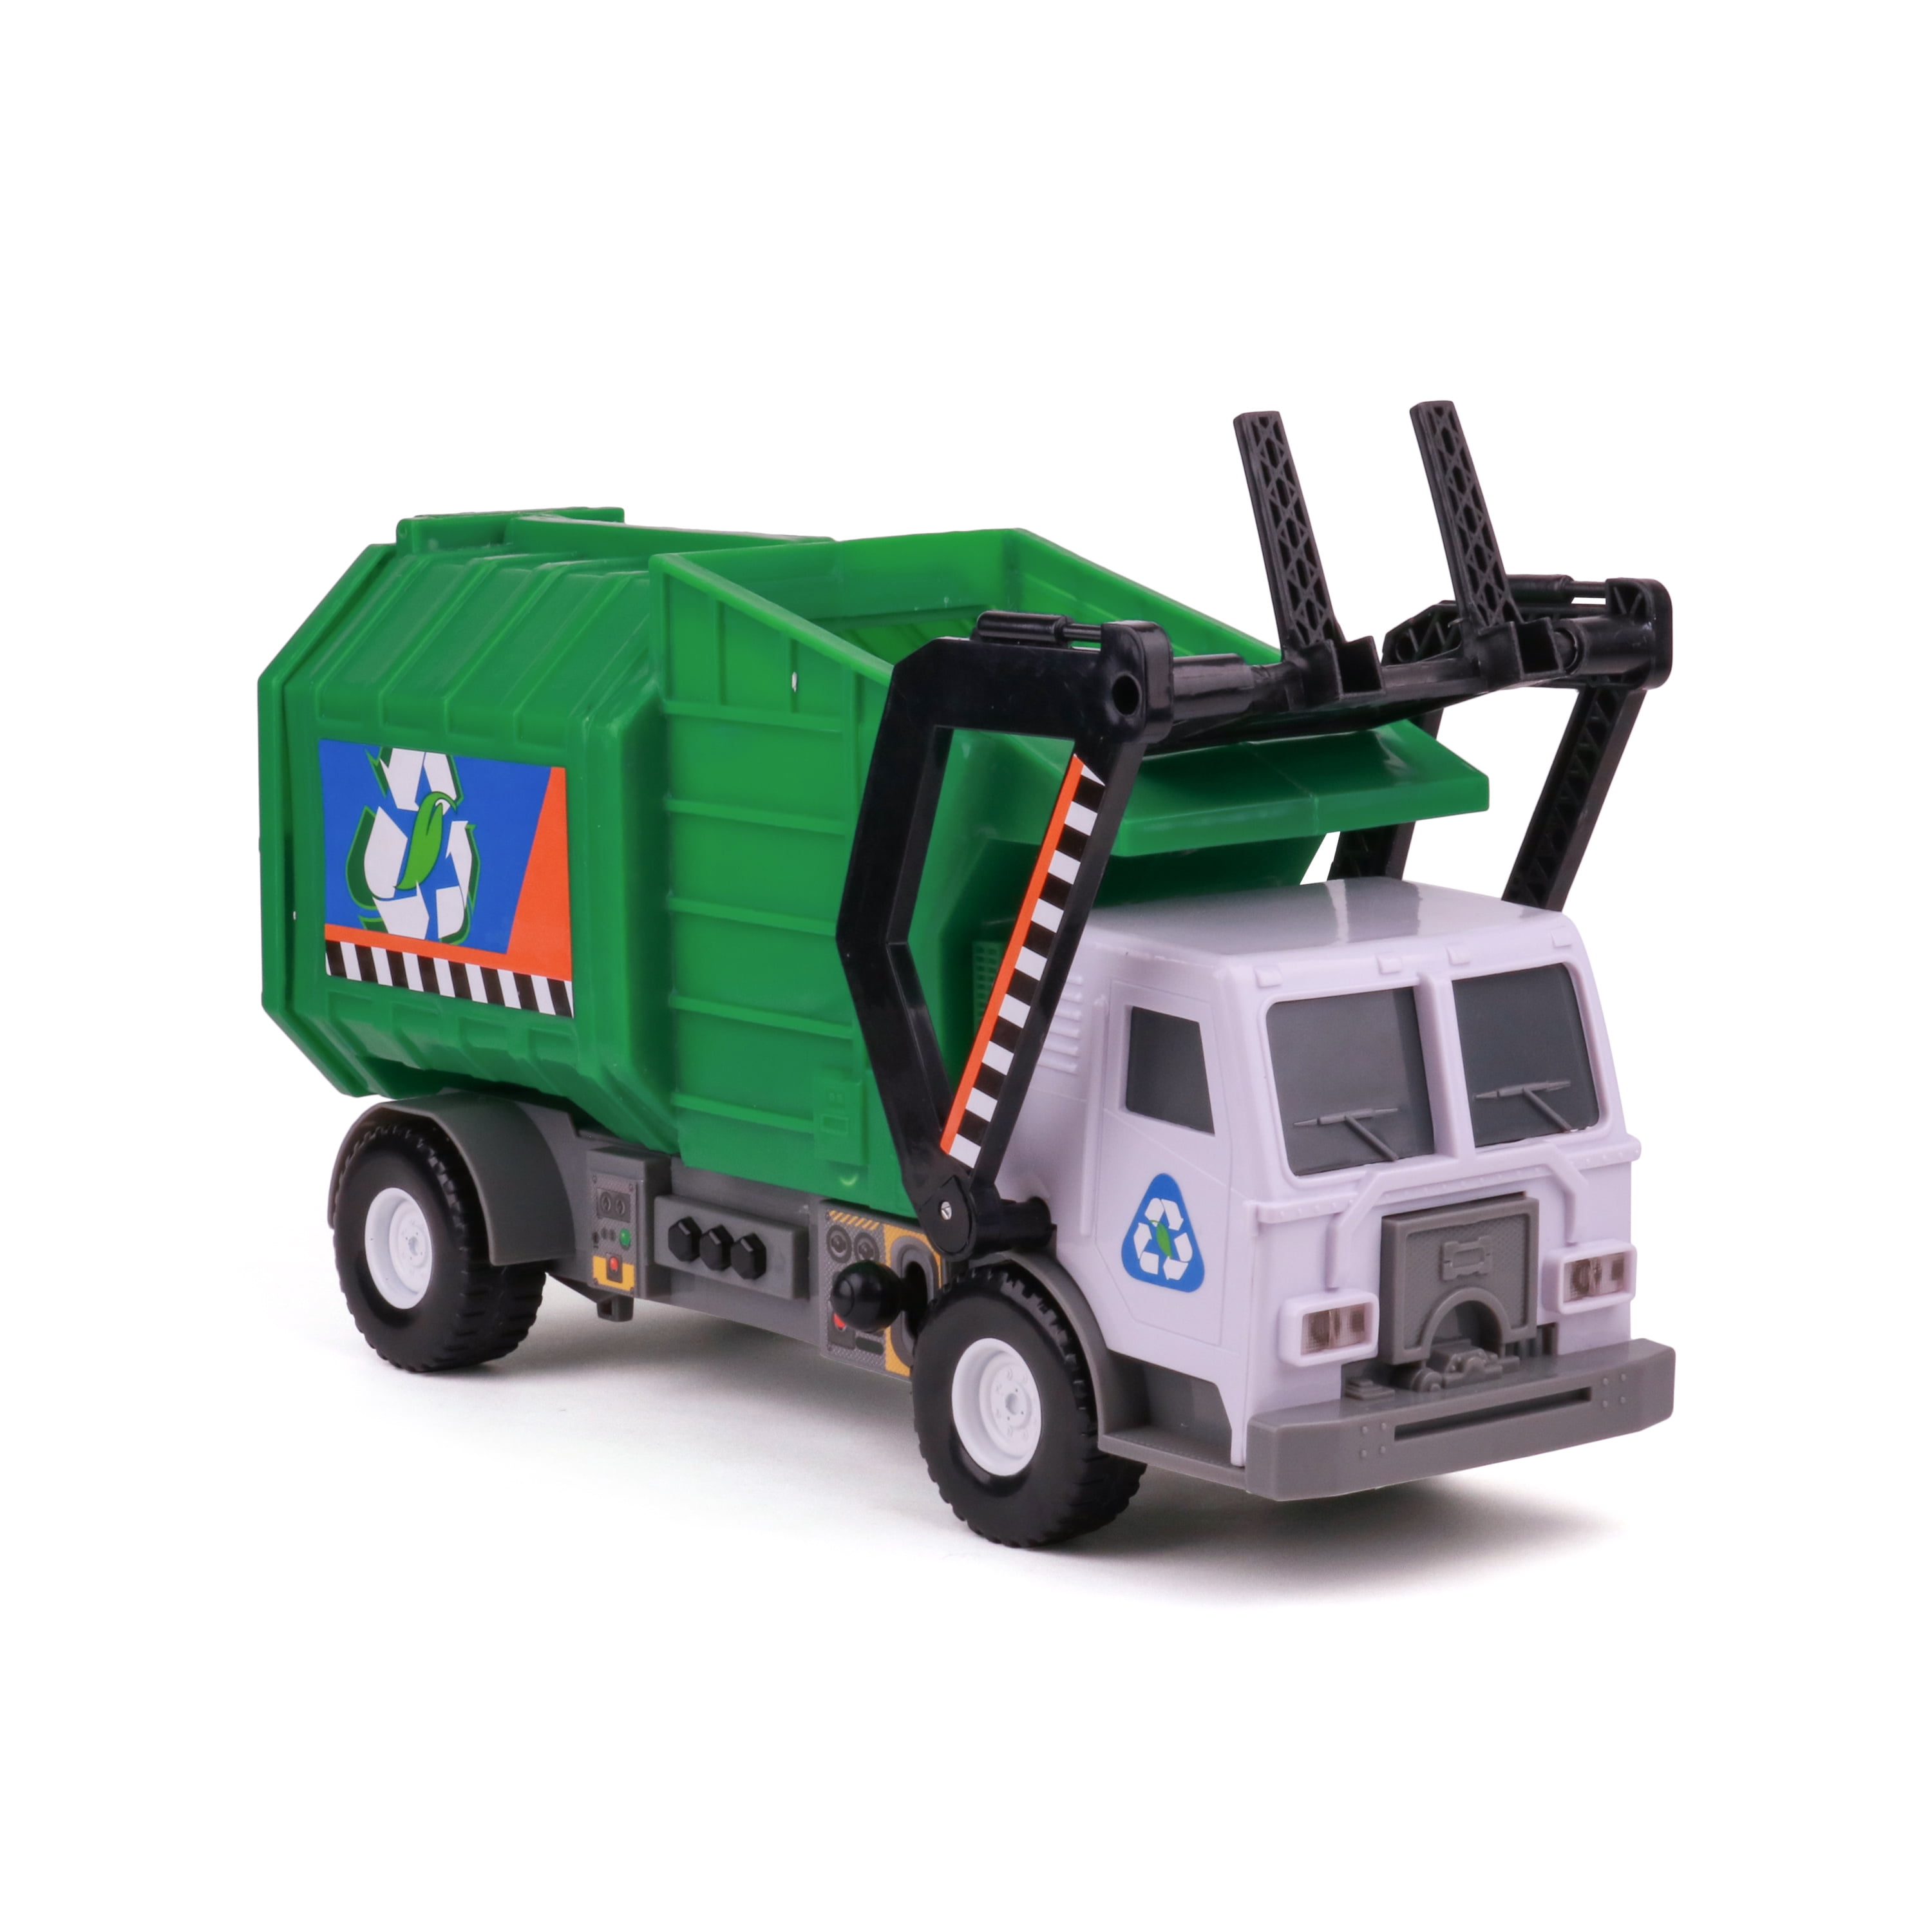 1/24 Scale Diecast Vehicle Material Transporter Garbage Truck Construct Toy US 